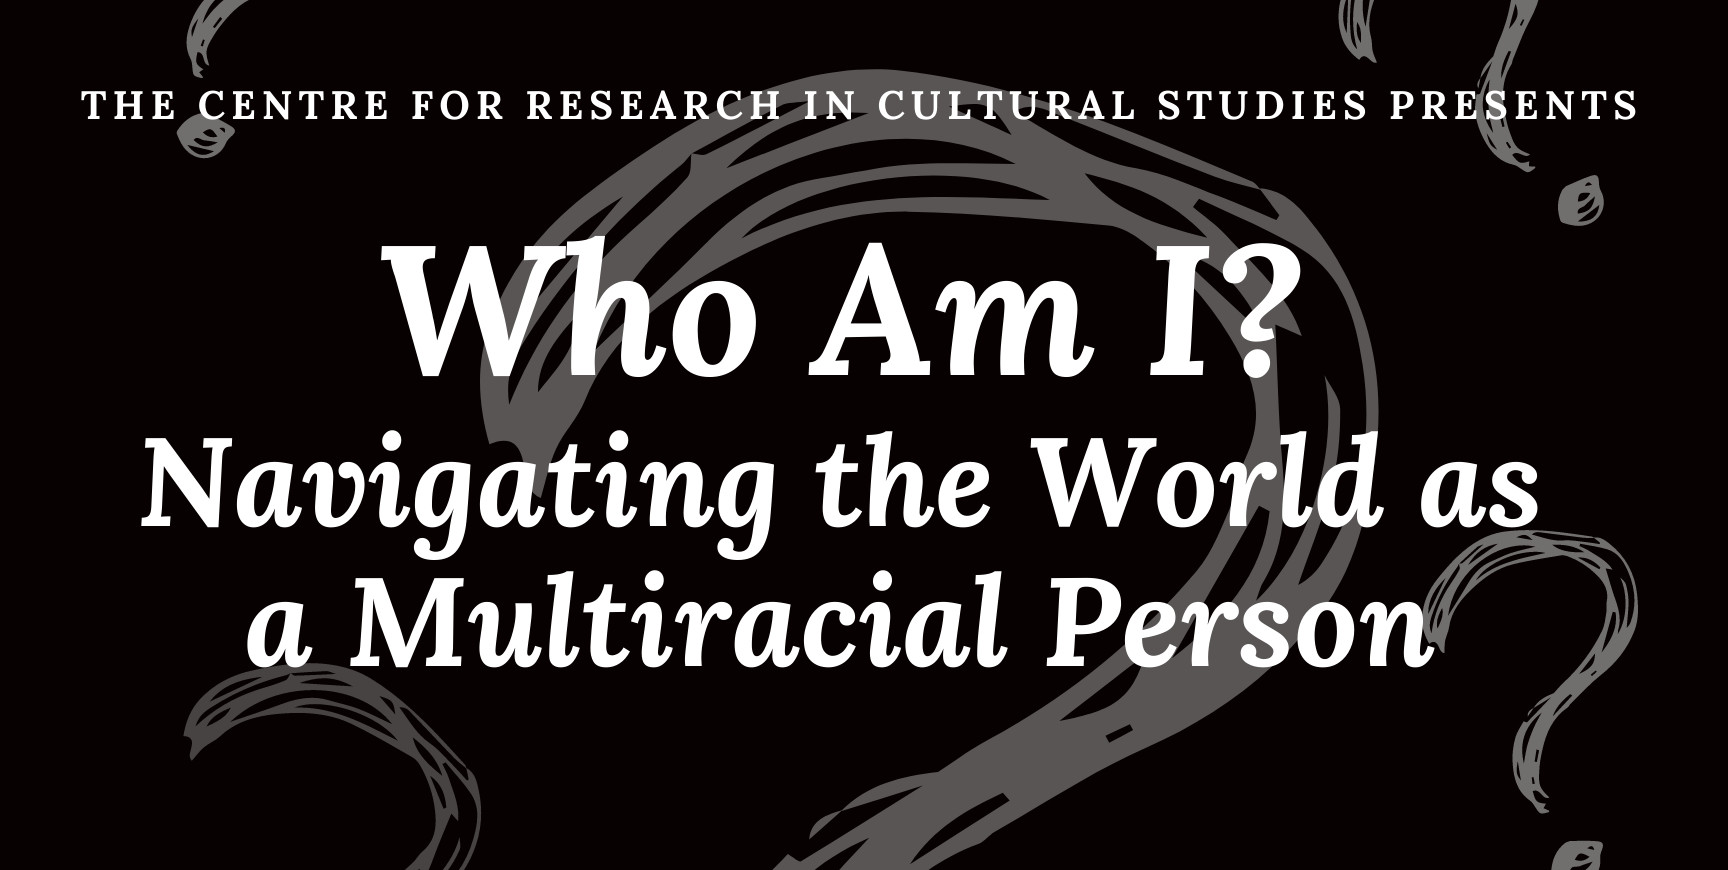 Title of poster: Who Am I?: Navigating the World as a Multiracial Person